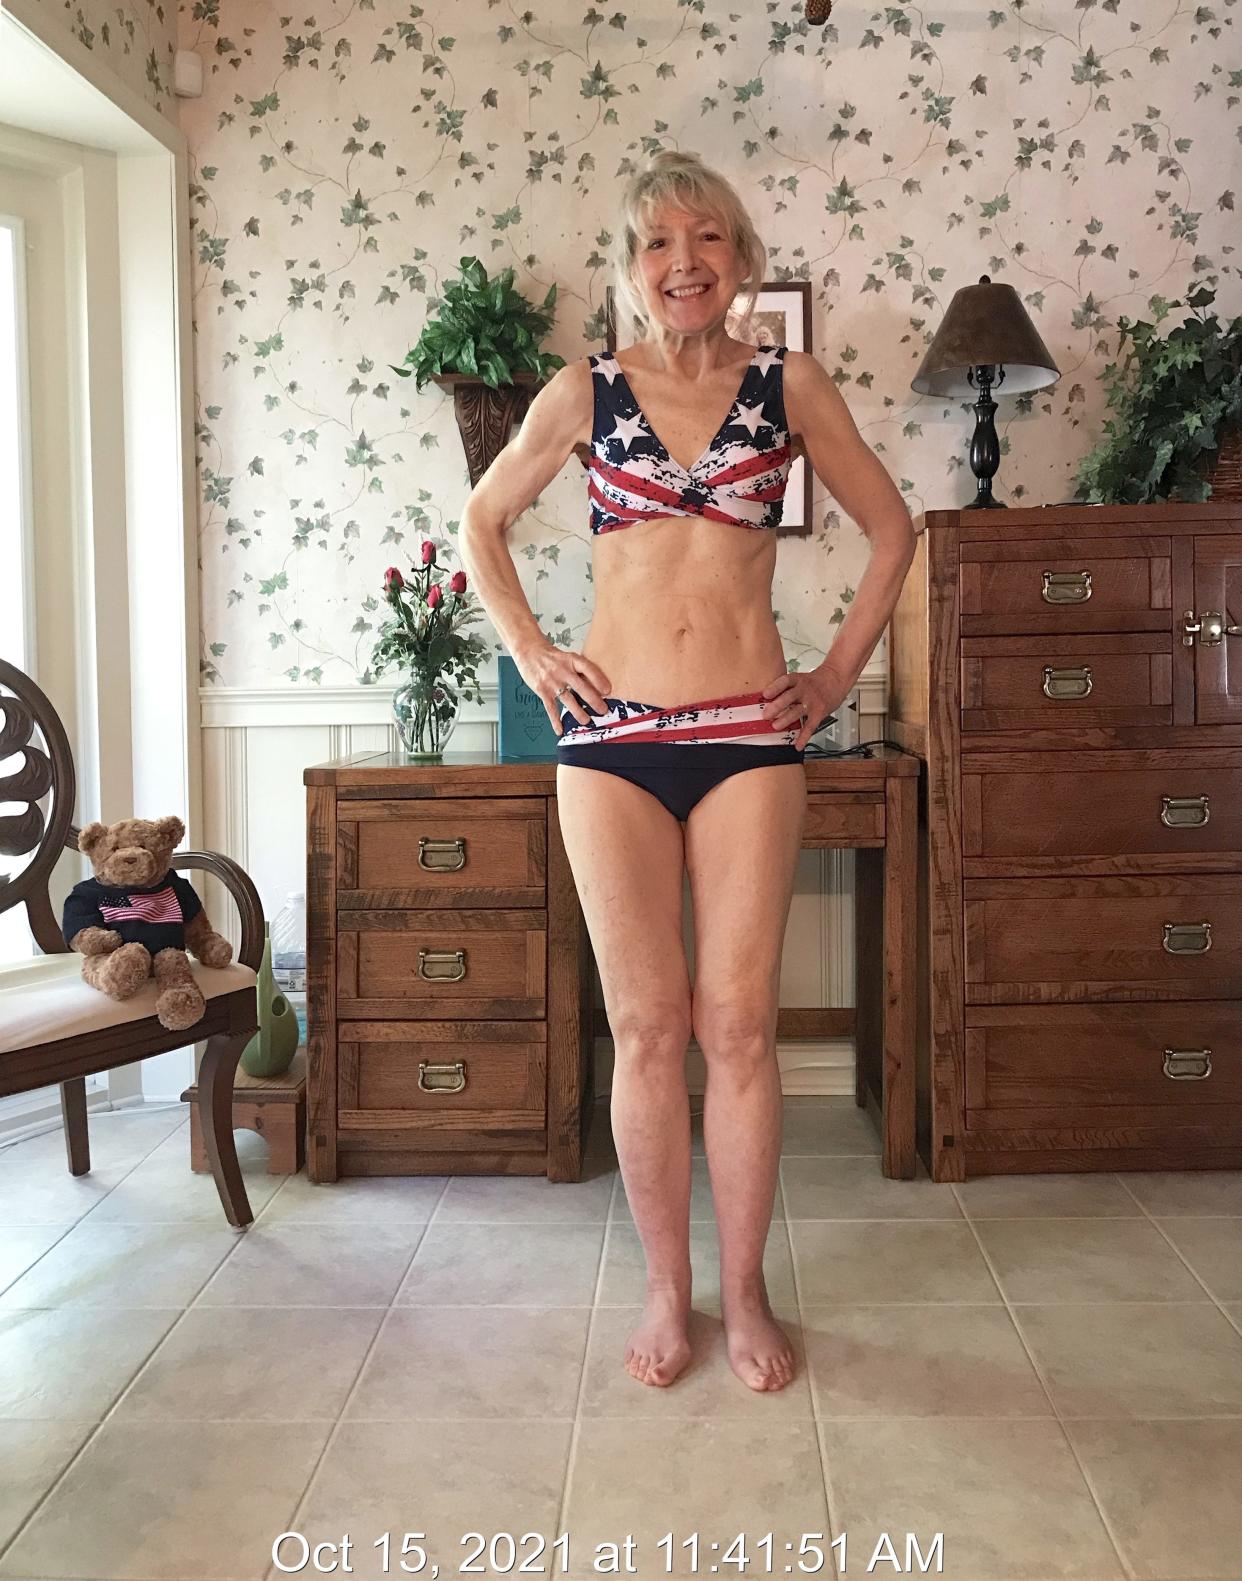 Dianne Kusztos Wilson says she's in the best shape of her life, and she has championships to prove it.